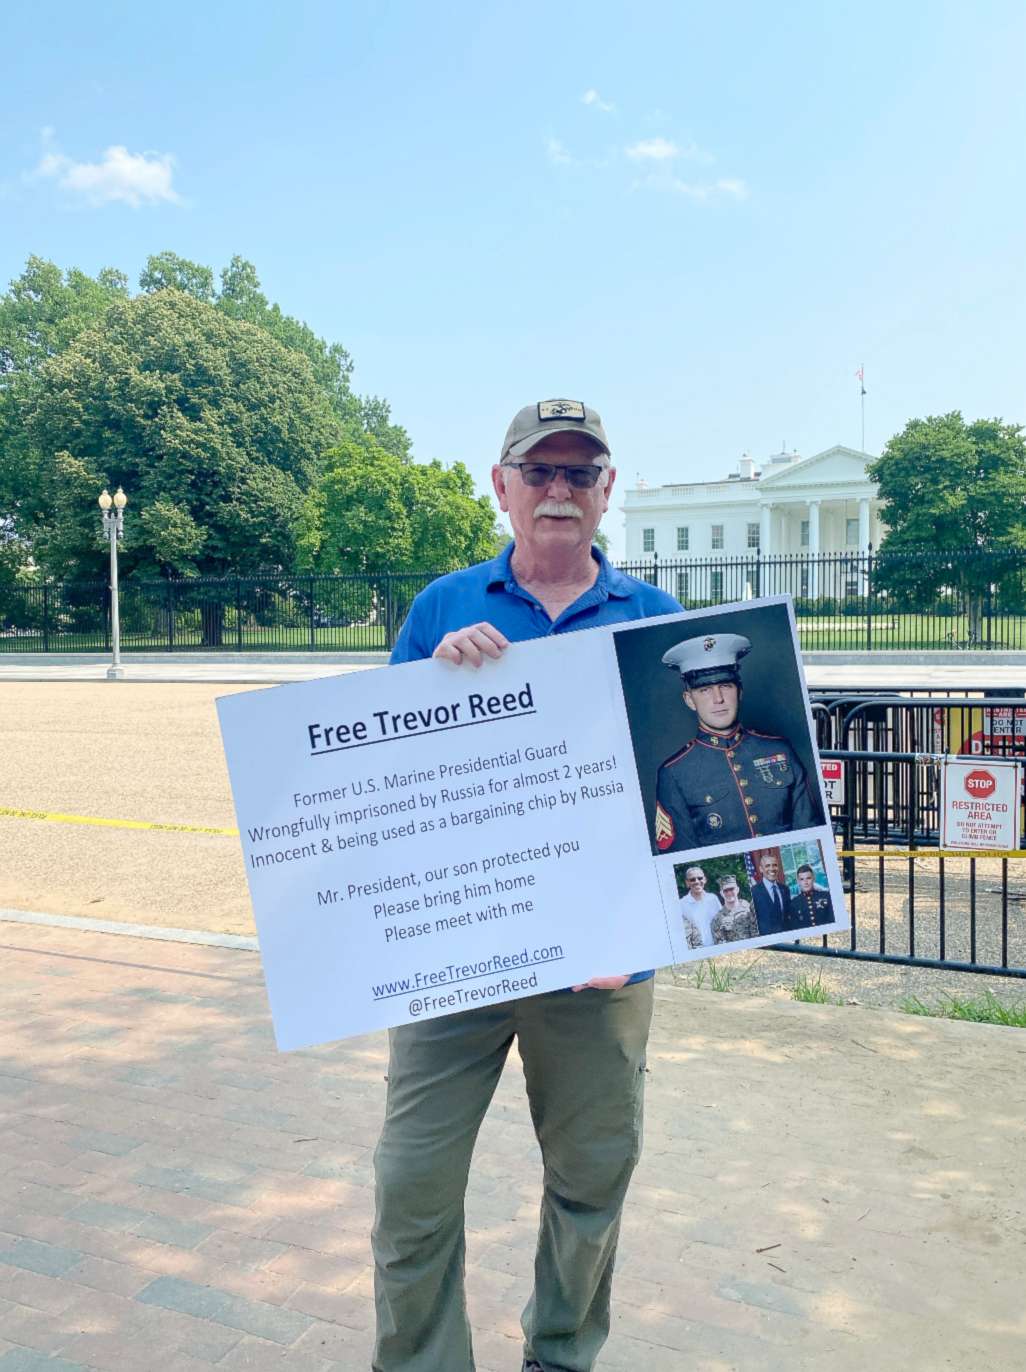 PHOTO: Joey Reed the father of former Marine Trevor Reed, who has been detained in Russia since 2019 in Moscow, protests outside of the White House, July 6, 2021.